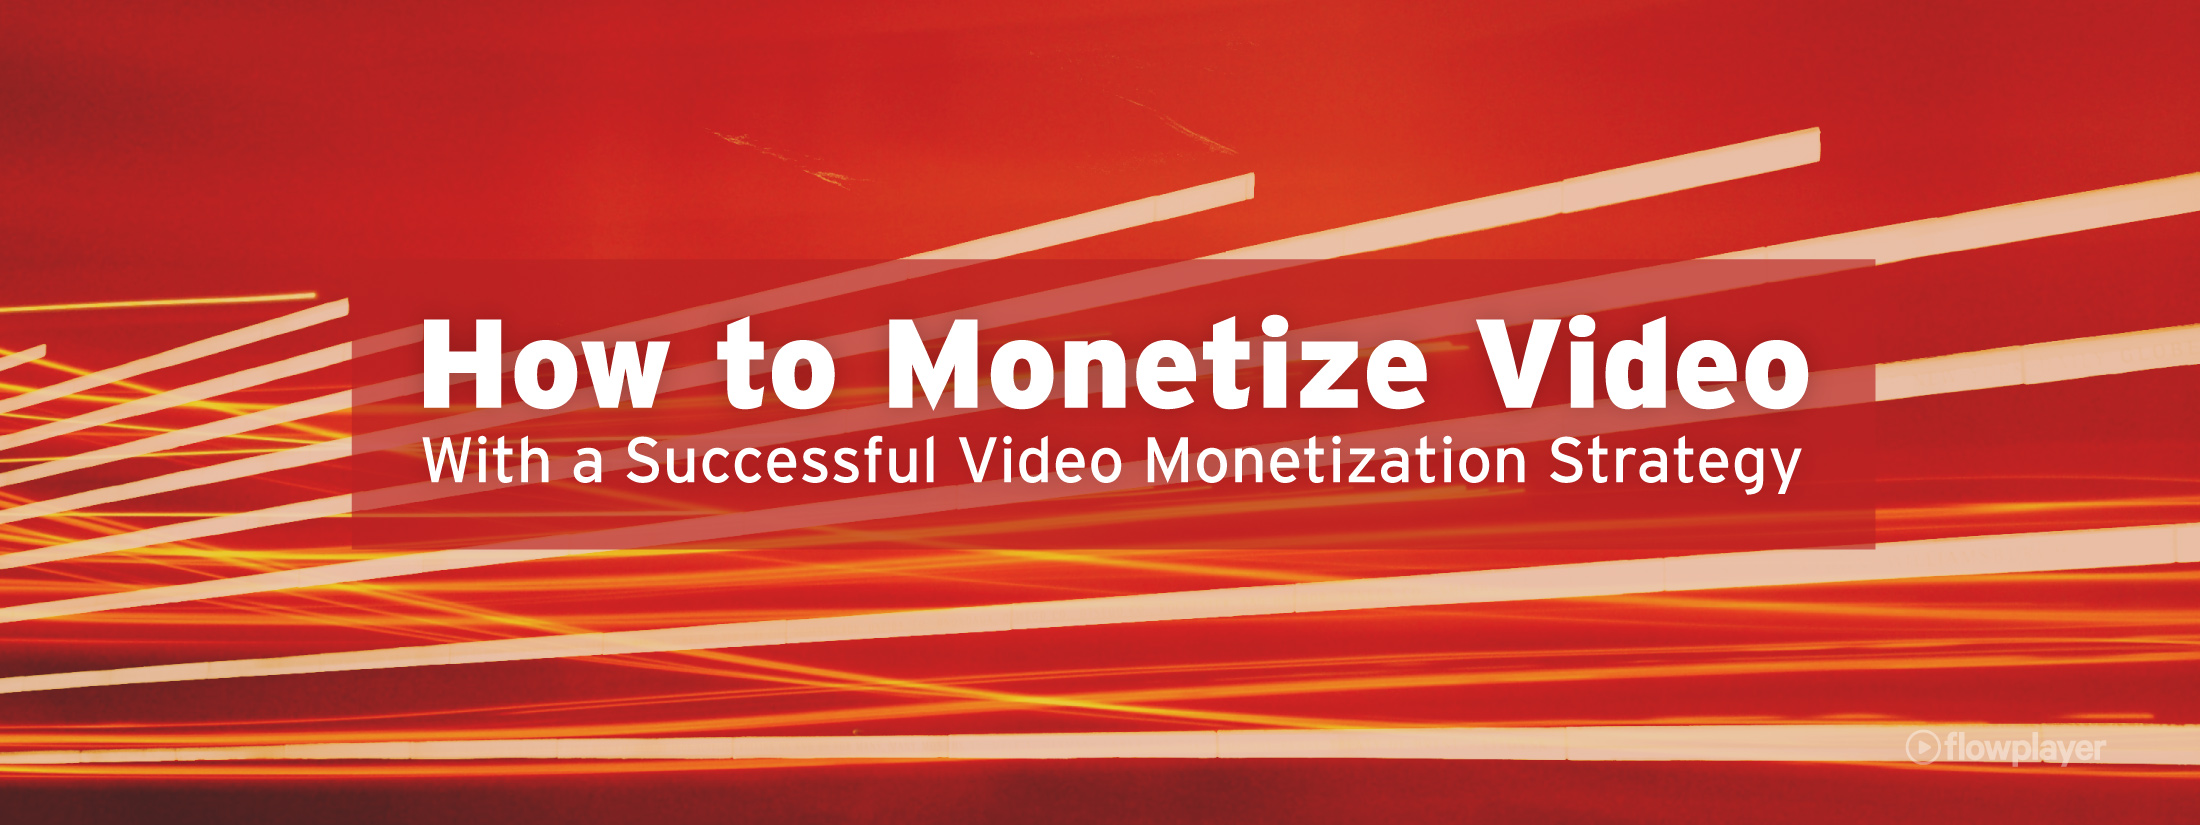 How to Monetize Video With a Successful Video Monetization Strategy